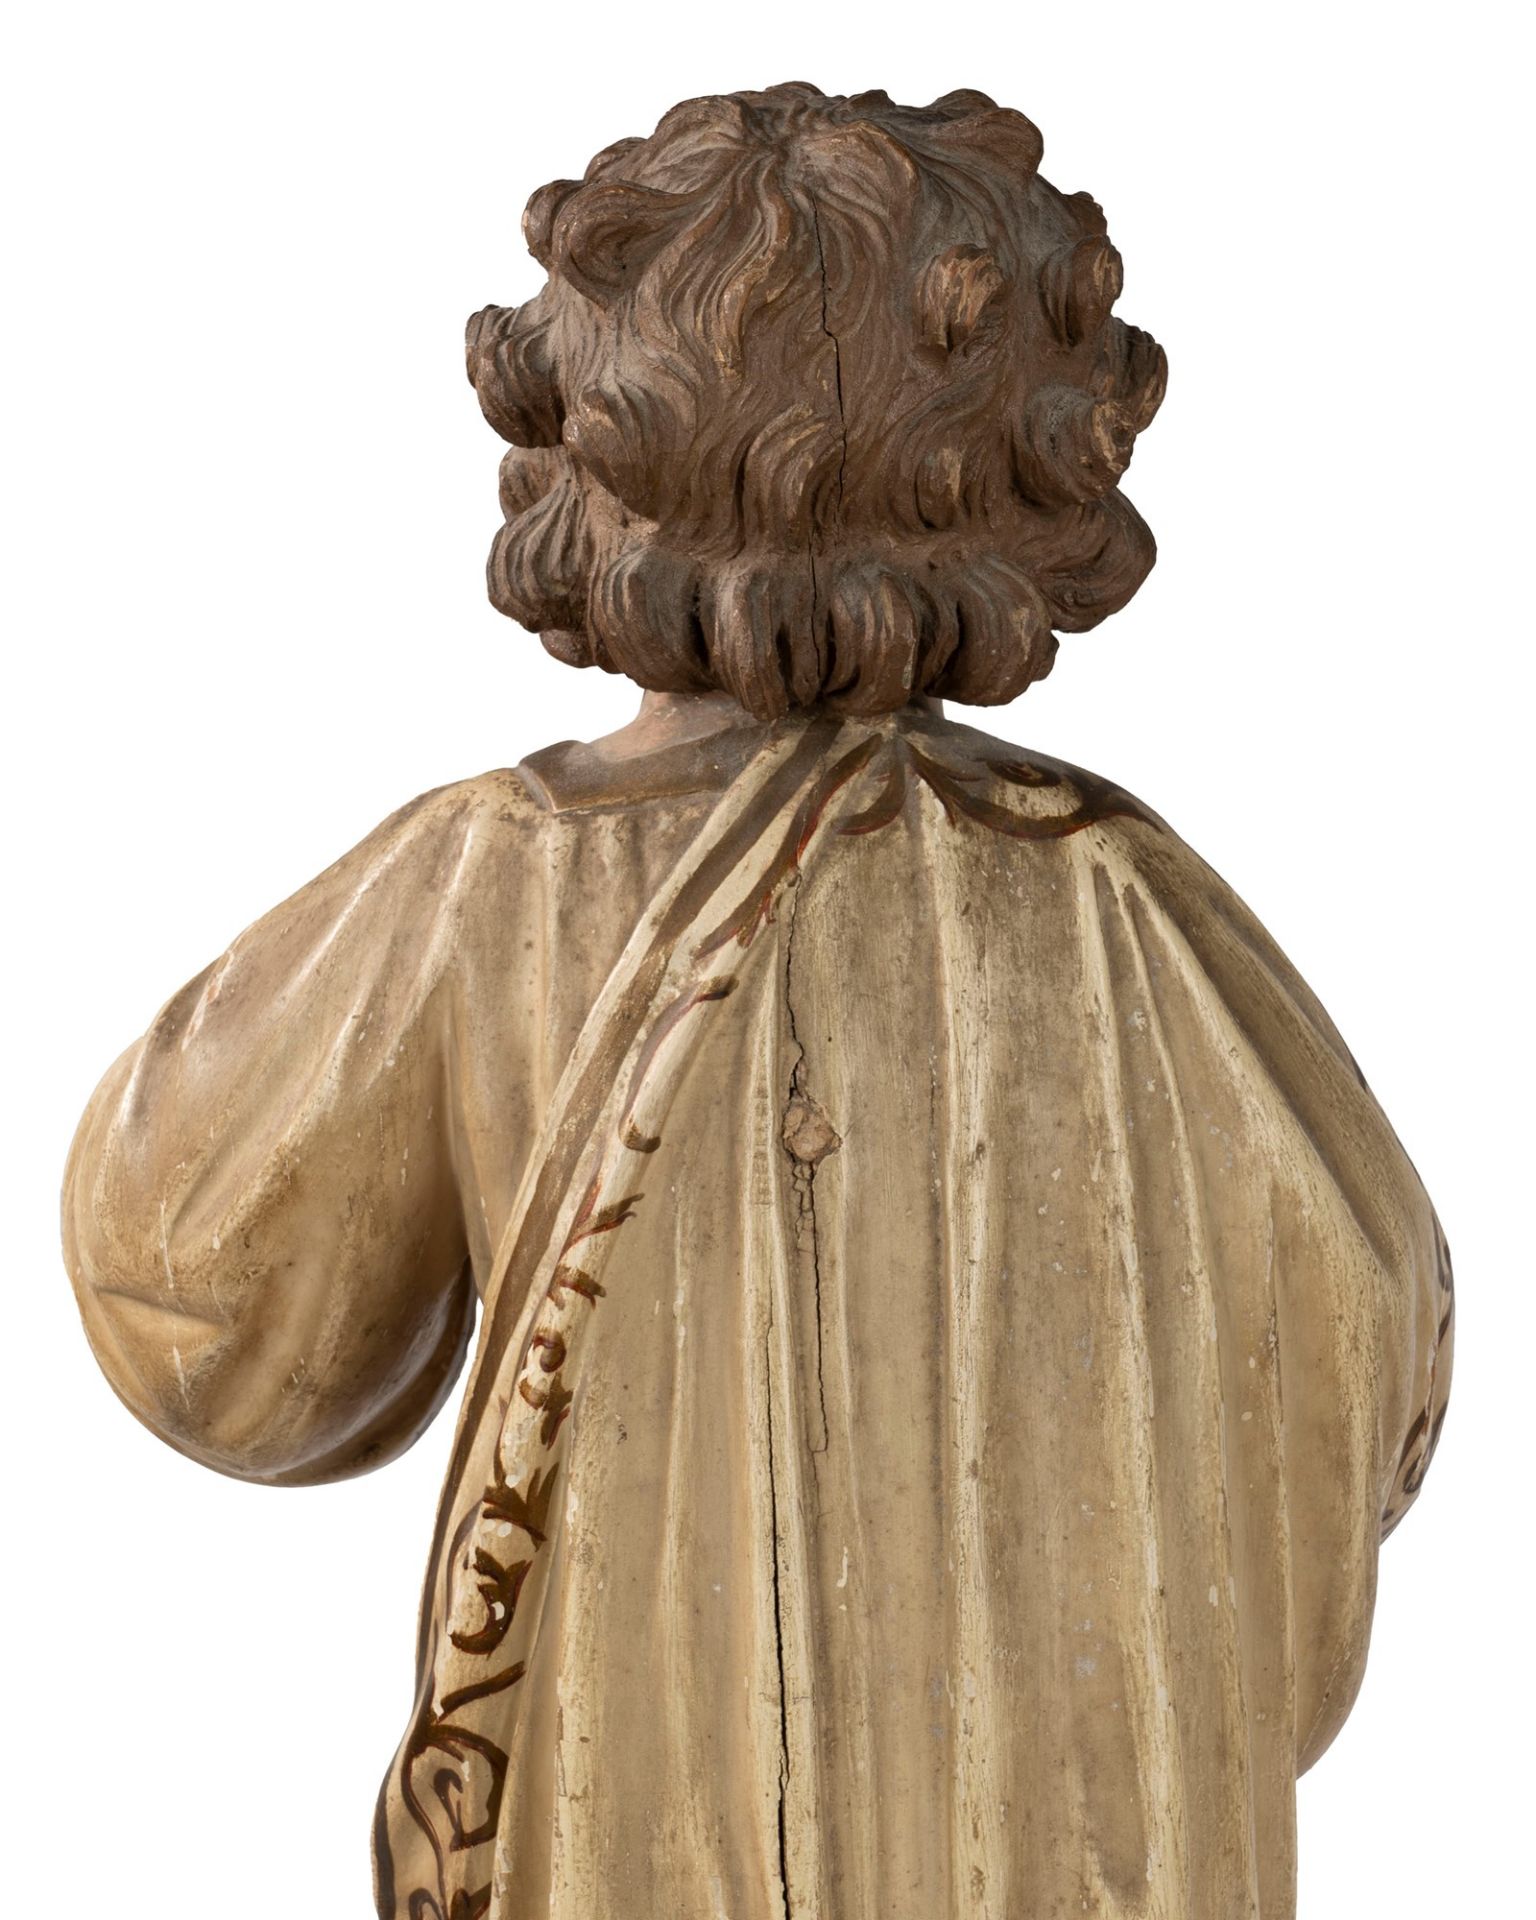 Baby Jesus in carved and lacquered wood, 19th century - Image 5 of 8